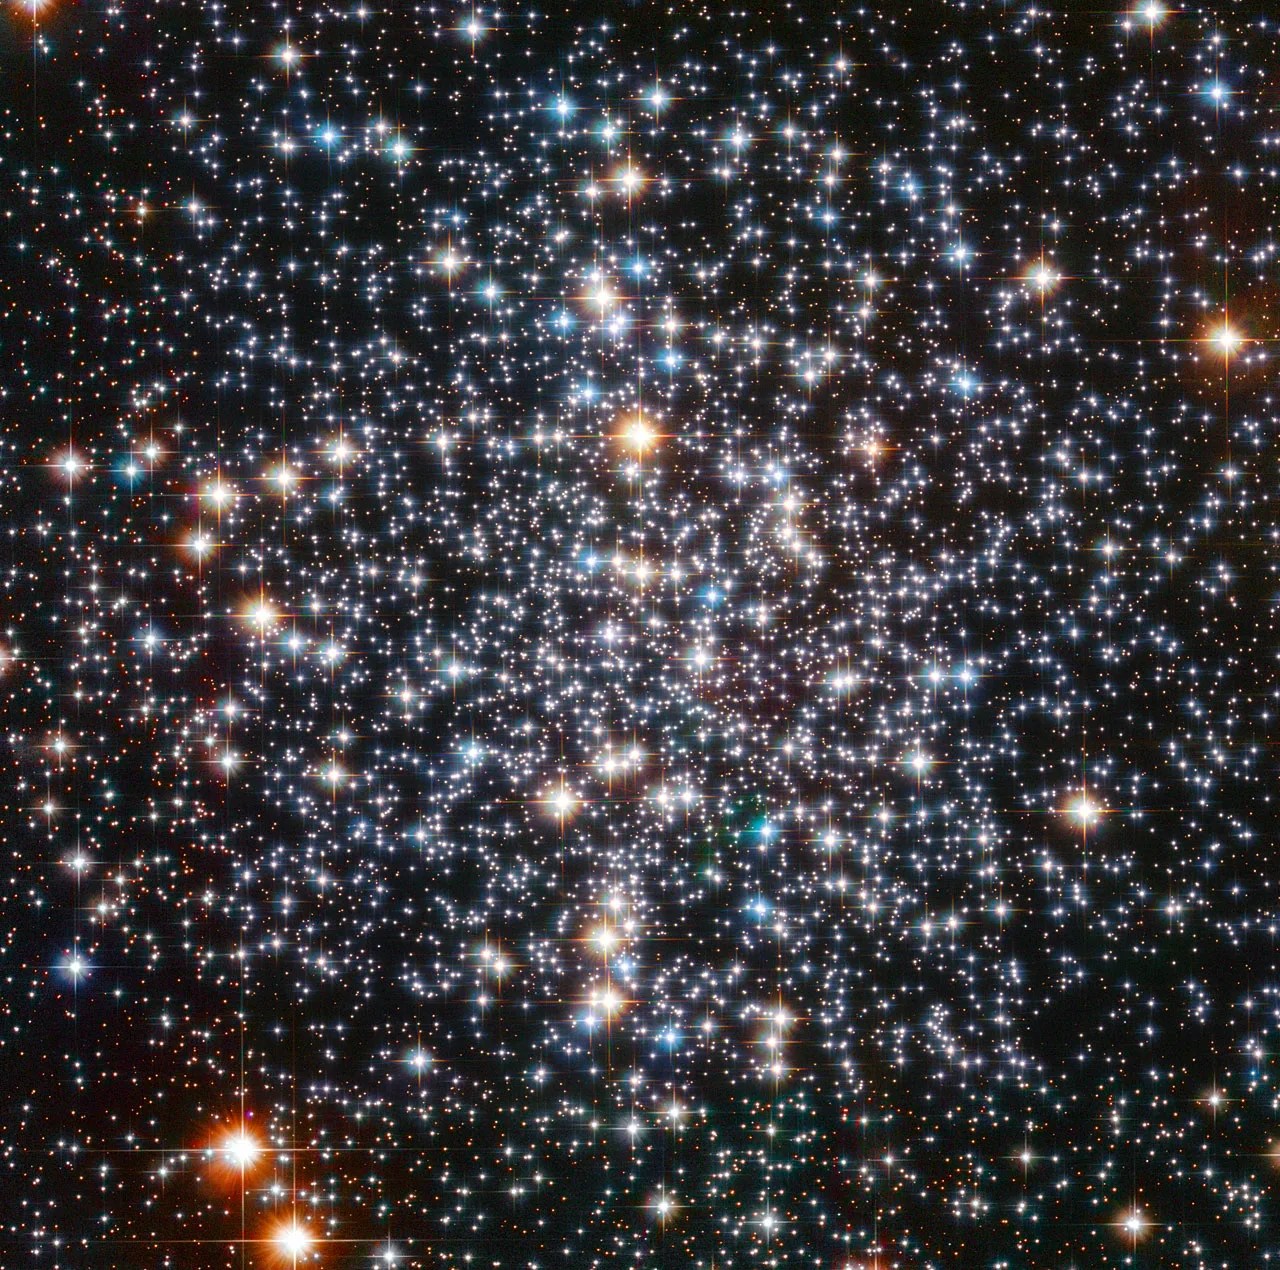 Hubble view of M4